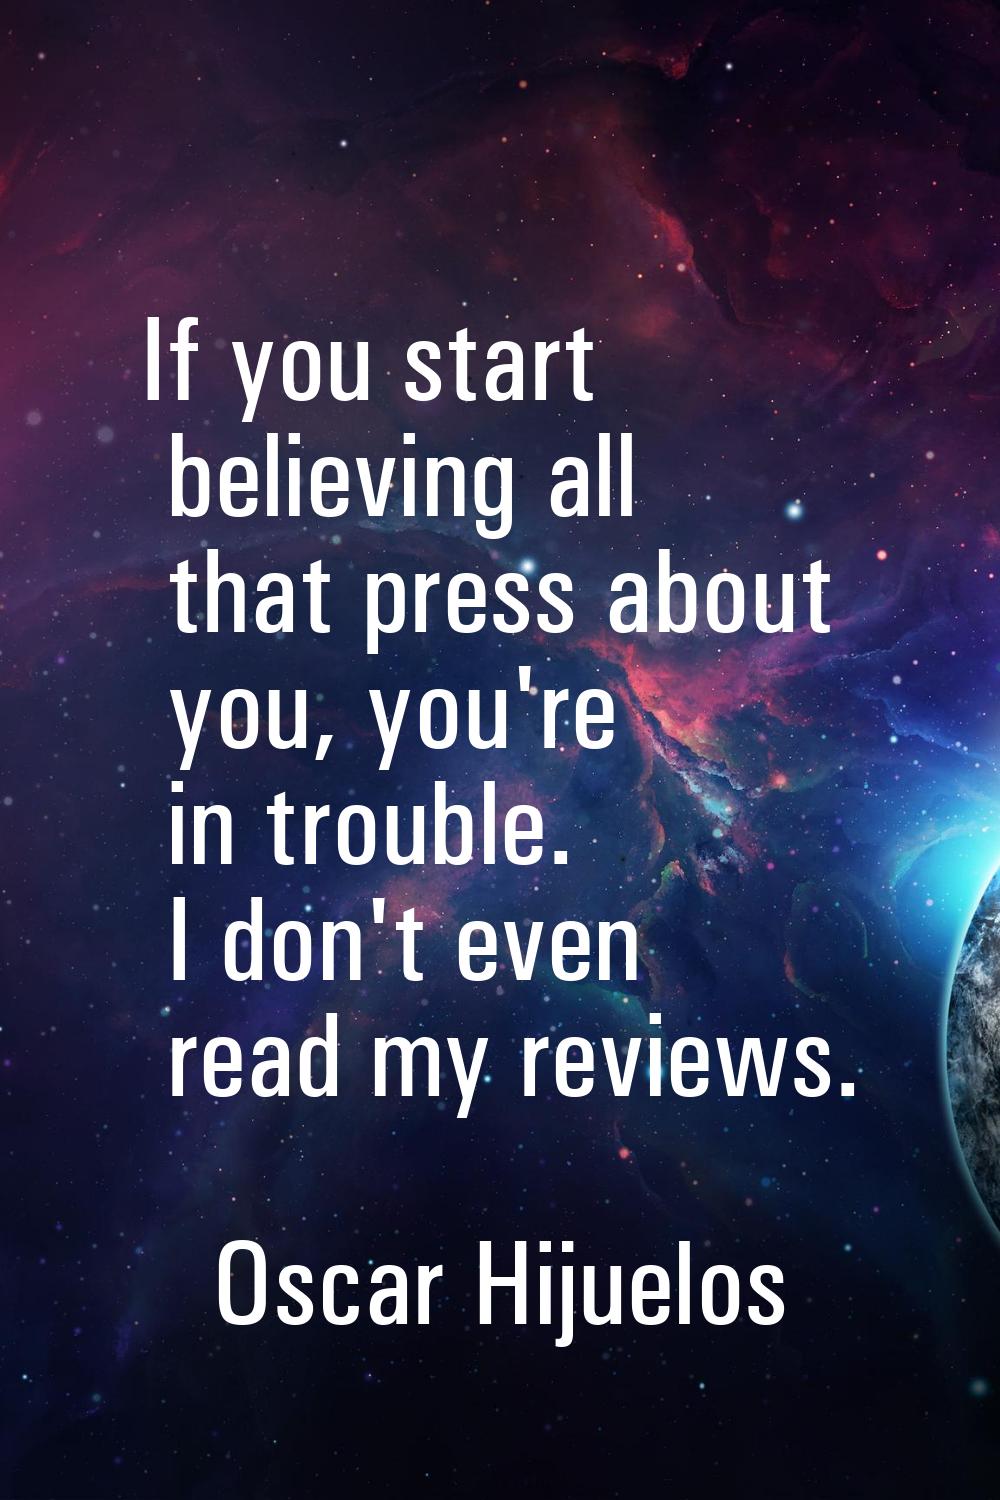 If you start believing all that press about you, you're in trouble. I don't even read my reviews.